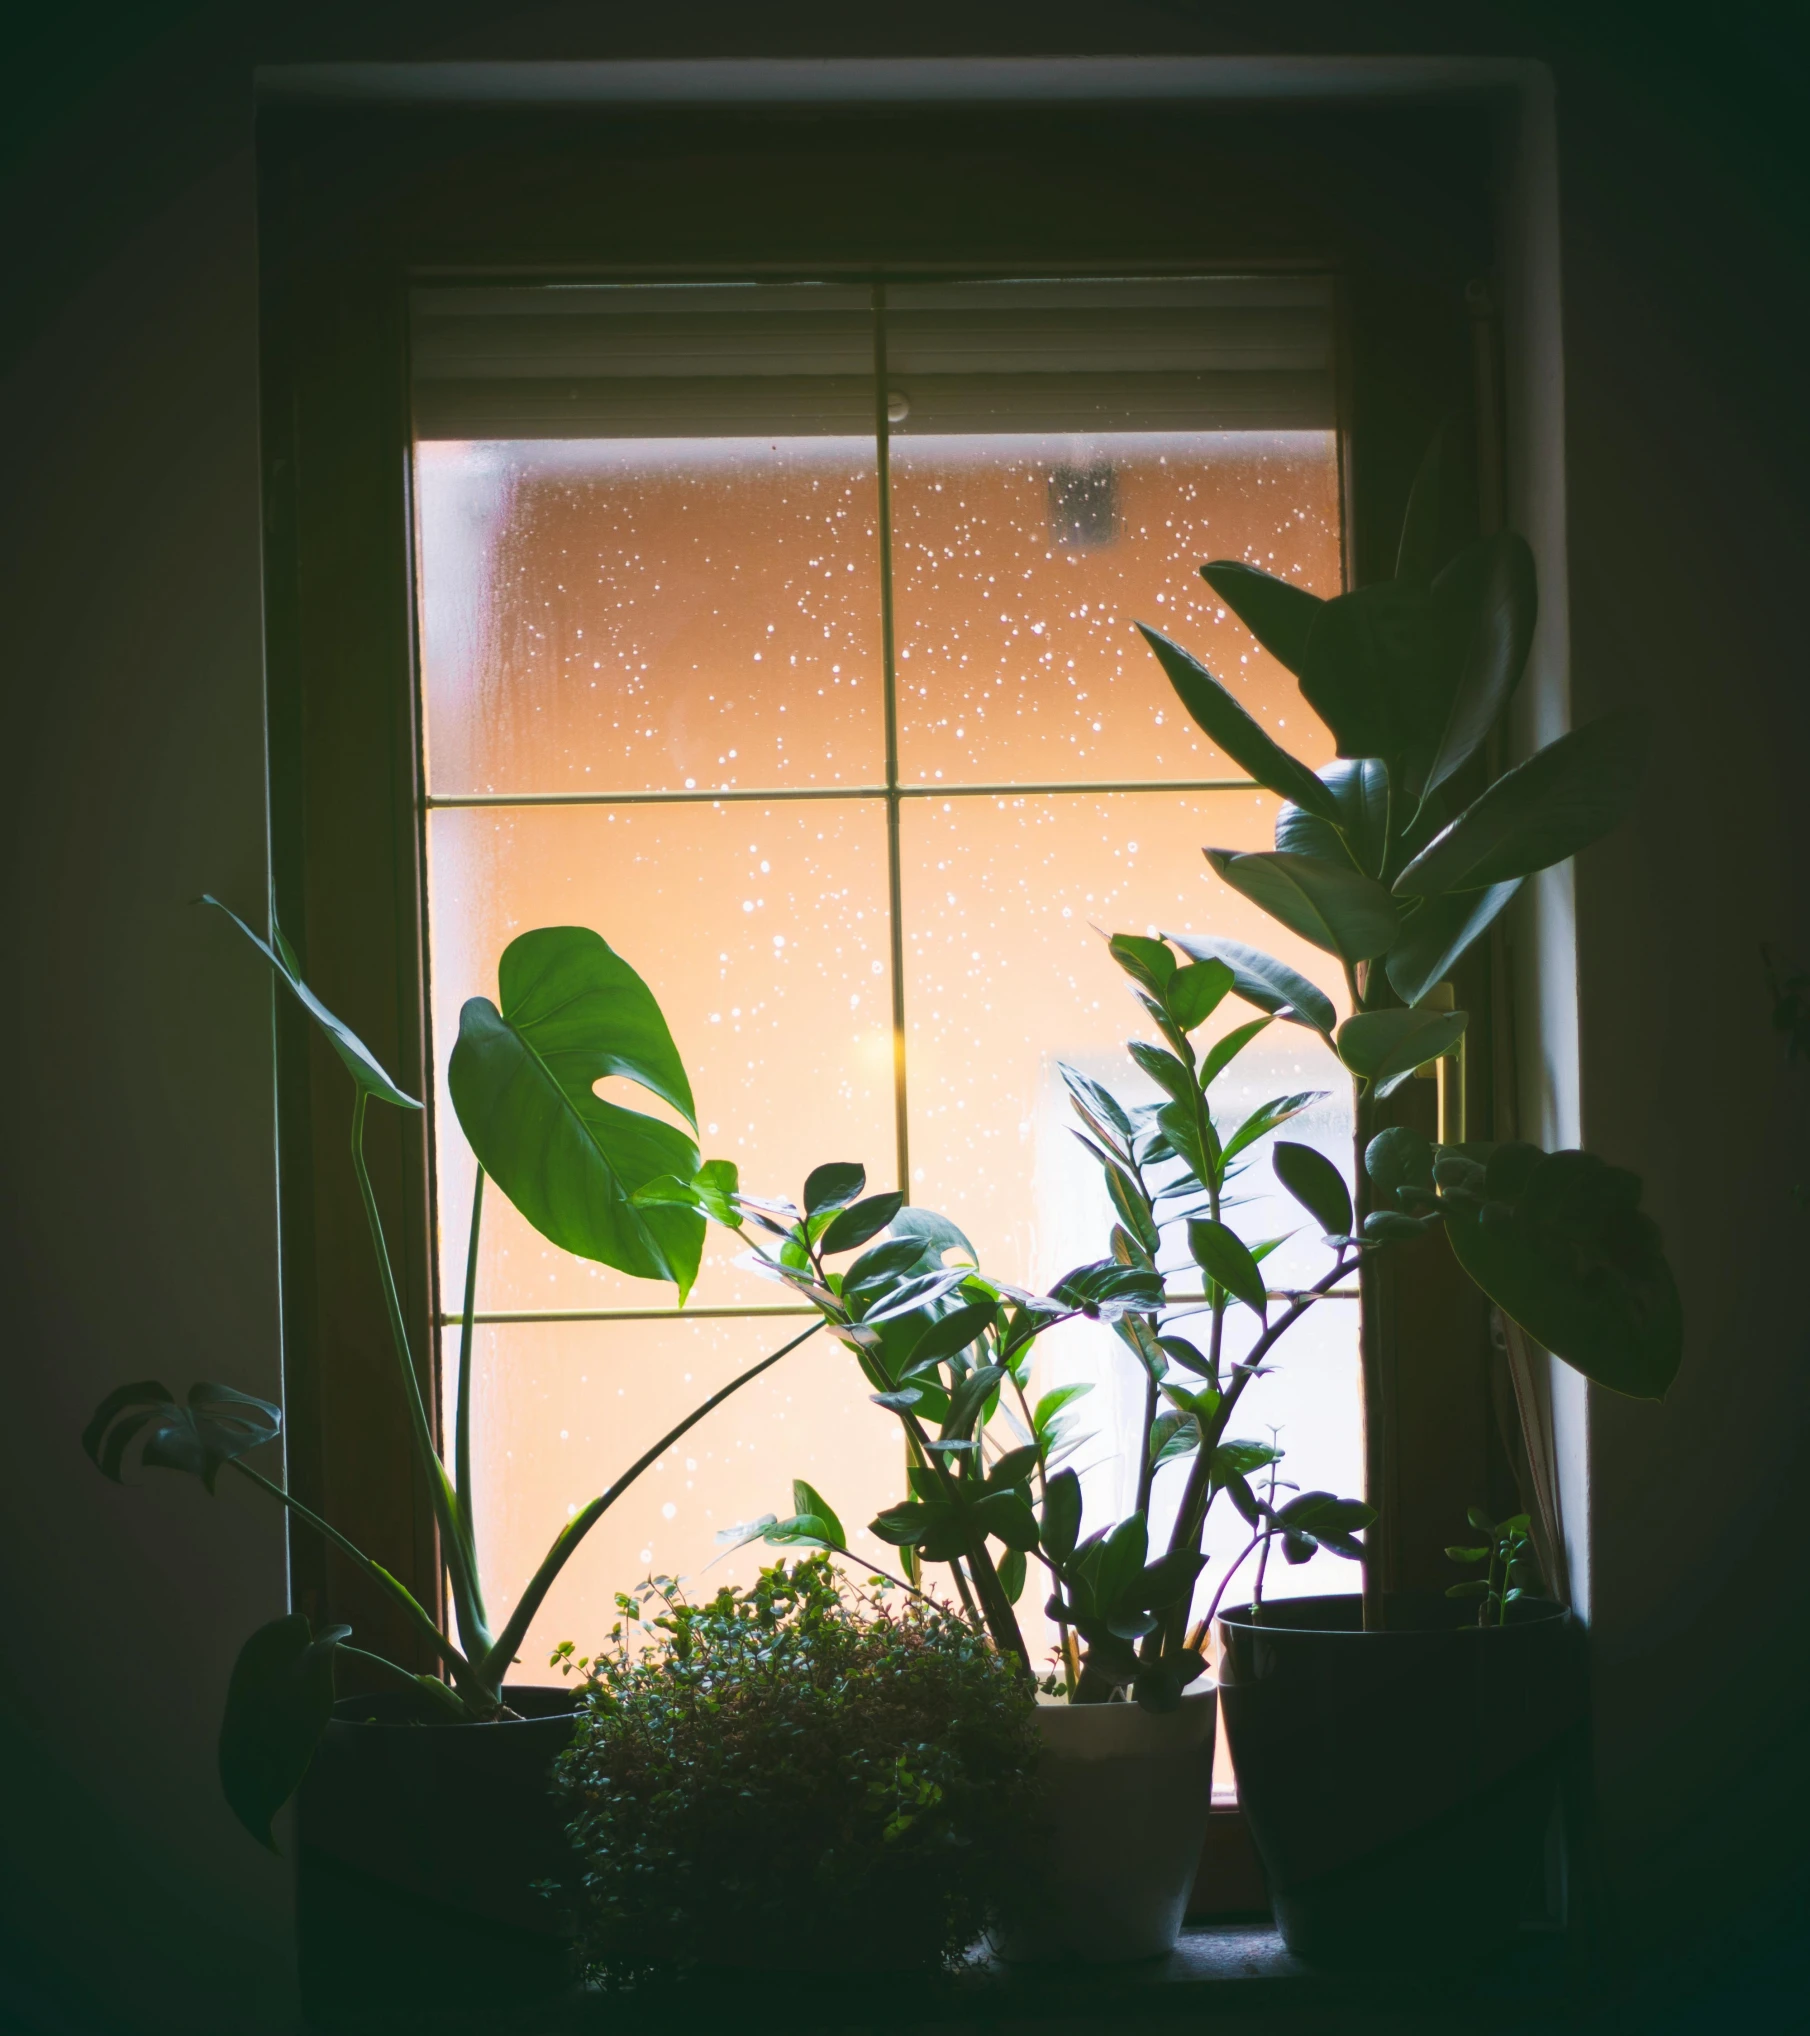 a window sill filled with potted plants, inspired by Elsa Bleda, unsplash, light and space, late night raining, light haze, underexposed, next to a plant